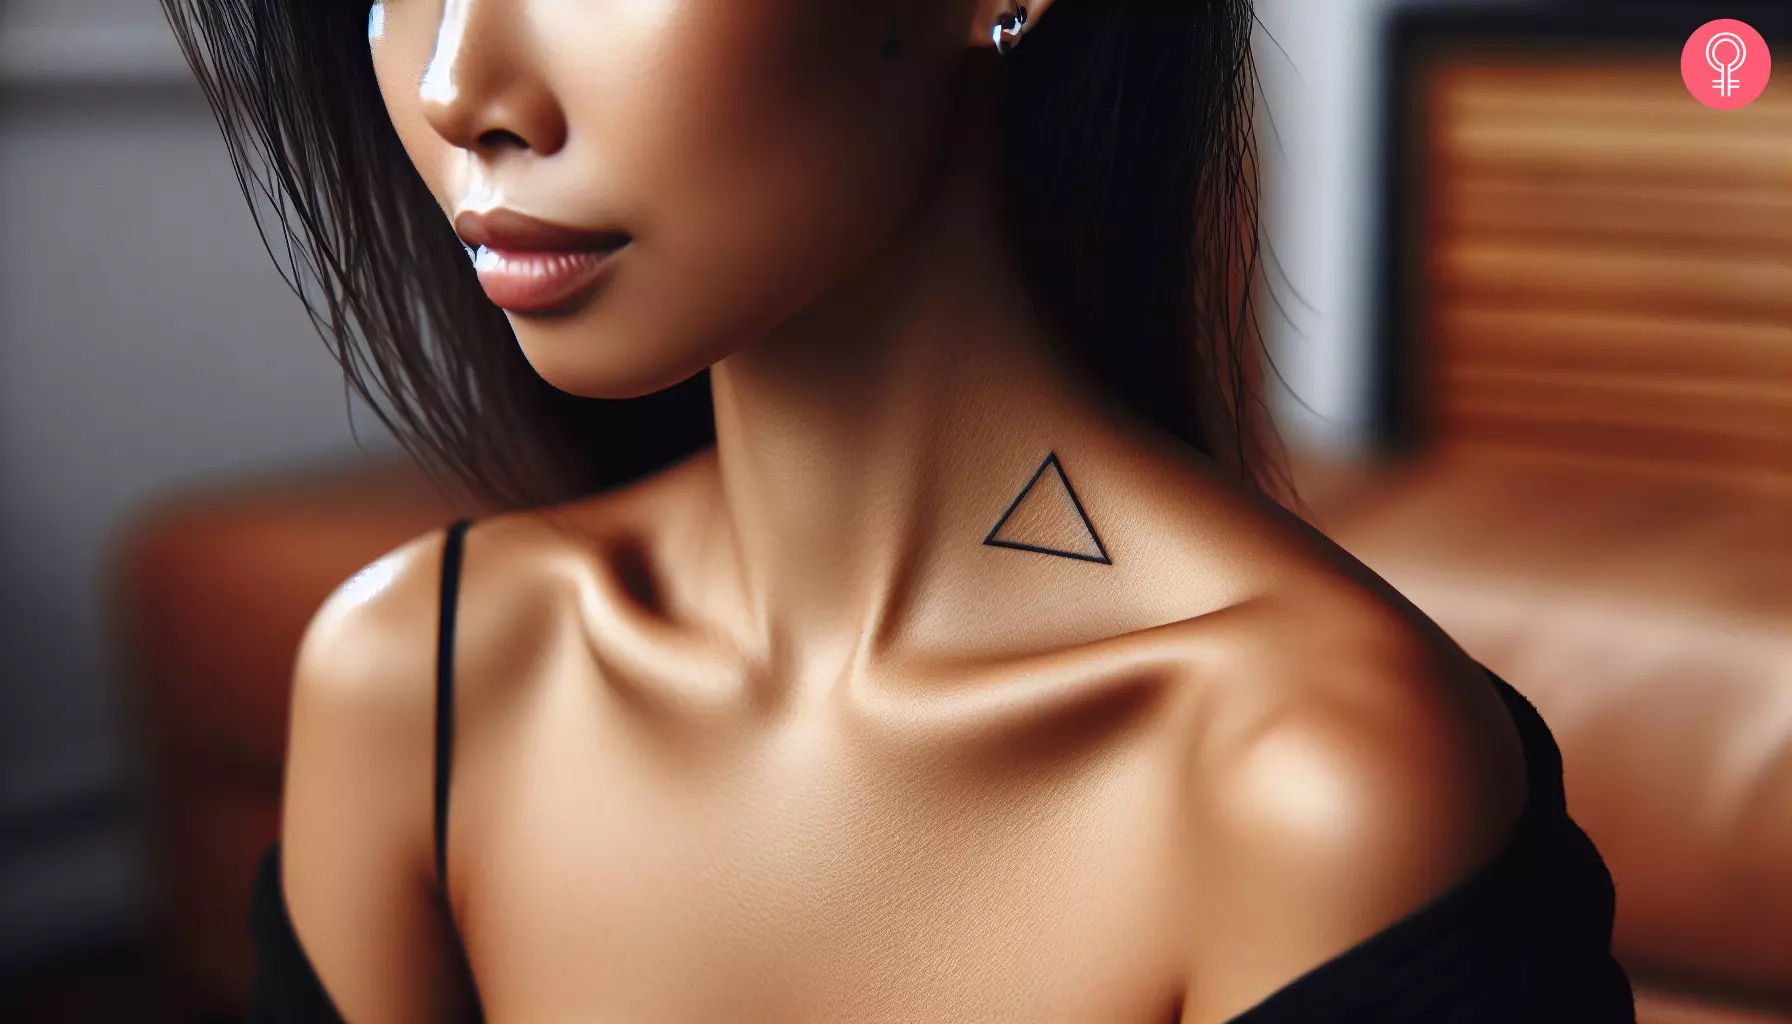 A woman with a triangle tattoo on her upper neck